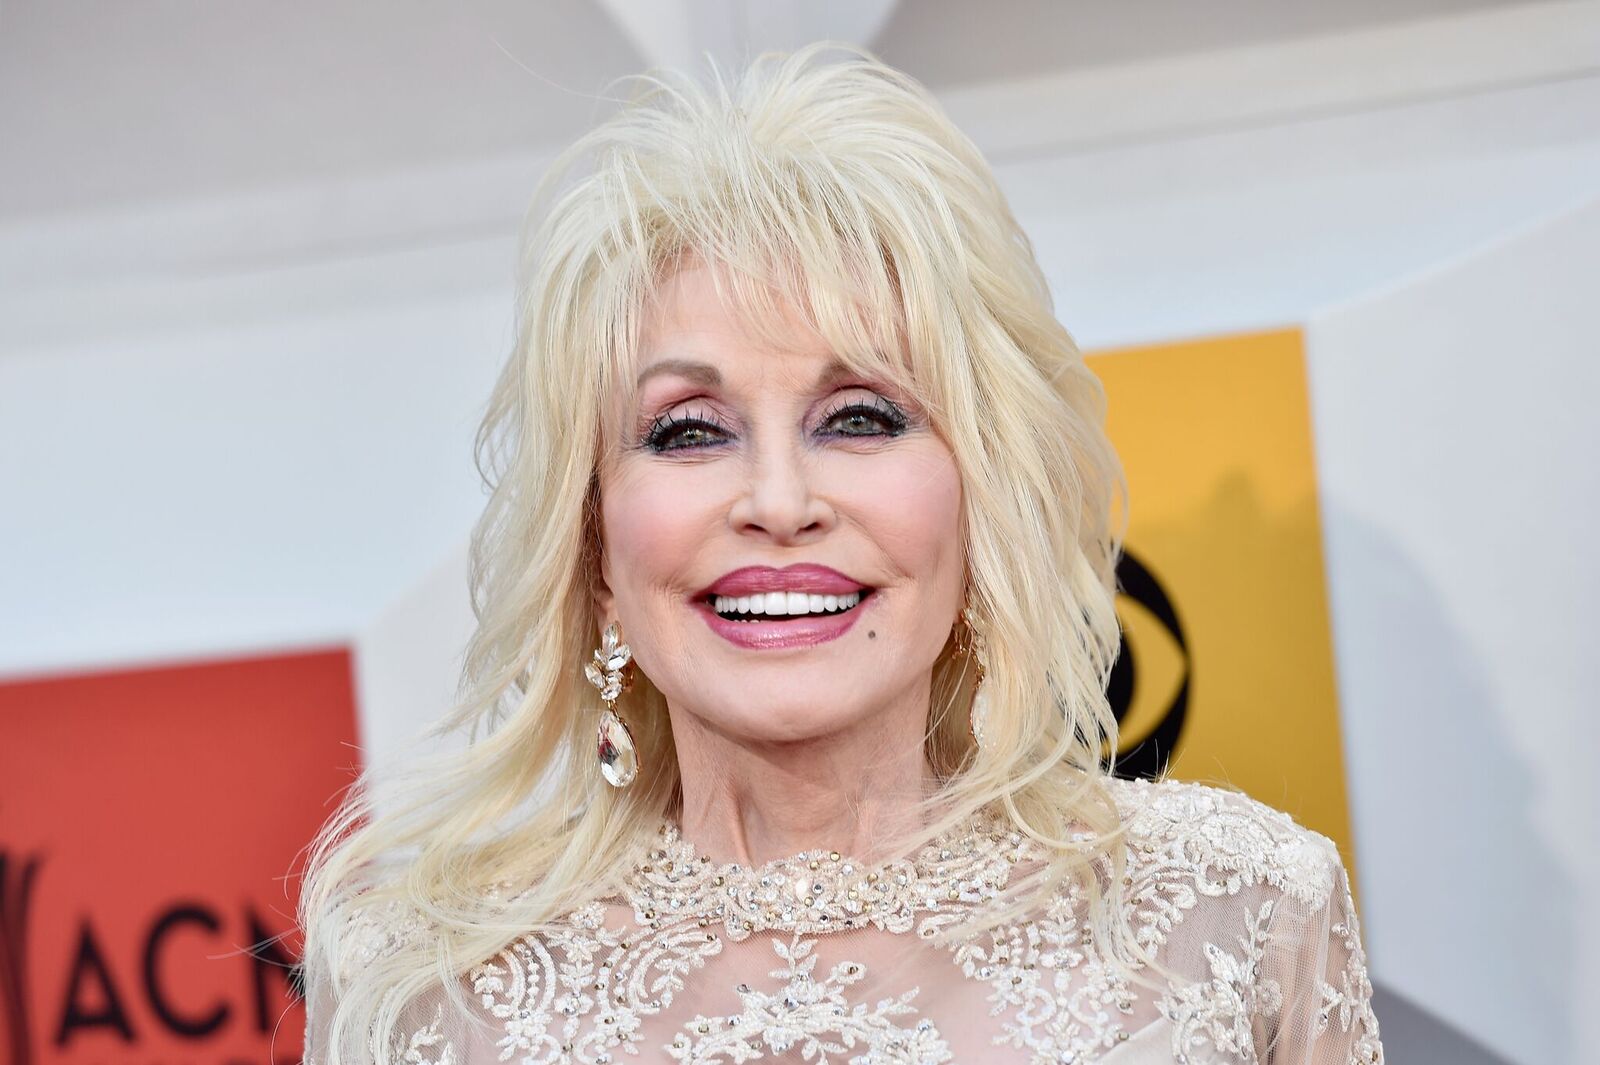 Singer-songwriter Dolly Parton attends the 51st Academy of Country Music Awards at MGM Grand Garden Arena on April 3, 2016 in Las Vegas, Nevada | Photo: Getty Images